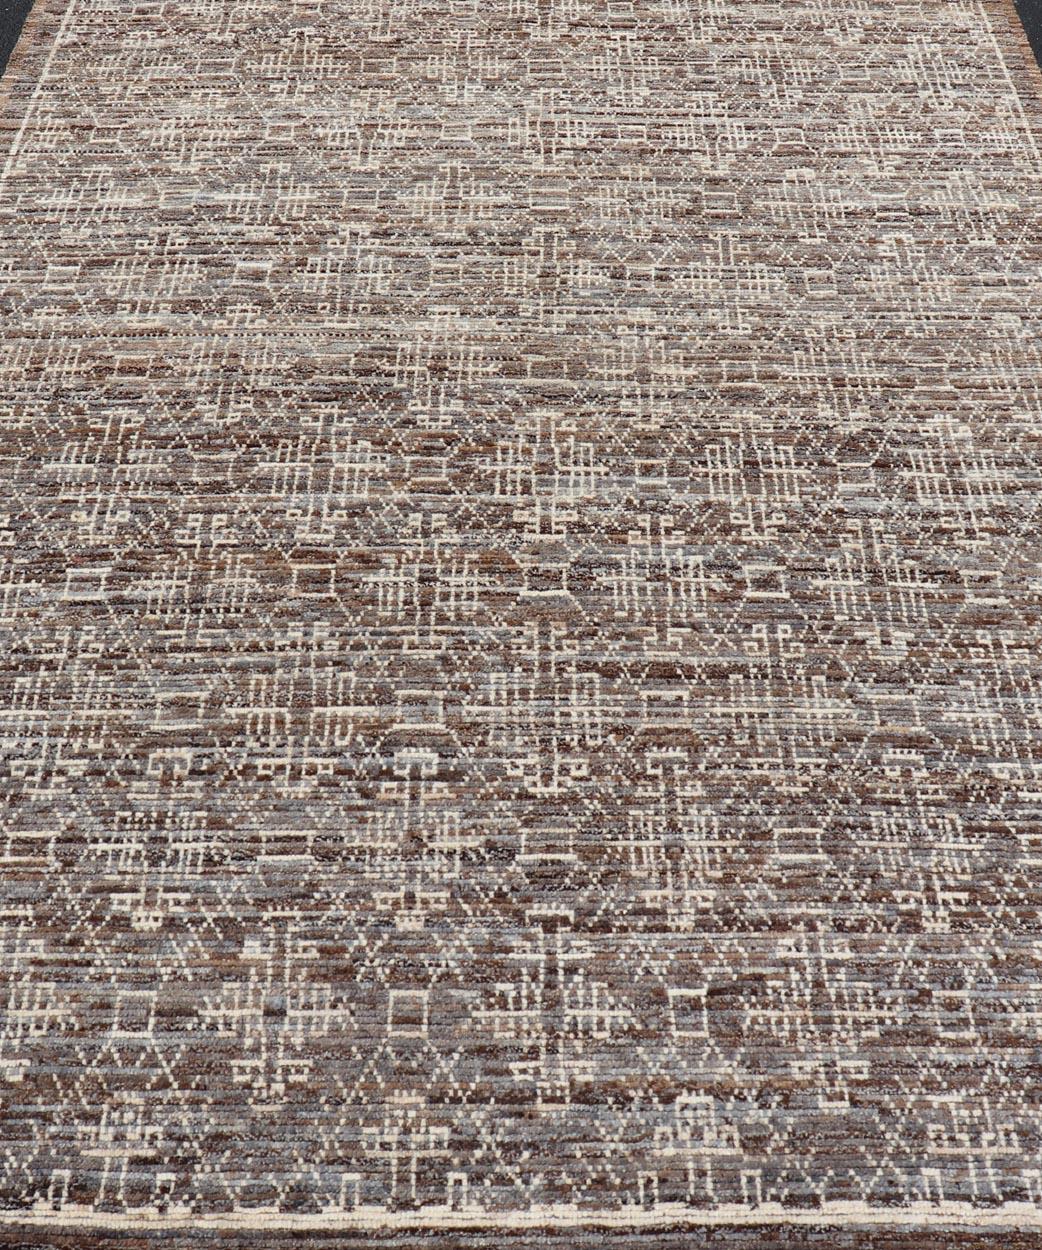 Modern Rug in Wool with All-Over Geometric Tribal Design in Brown and Ivory. Keivan Woven Arts /rug SNK-2307, country of origin / type: Afghanistan / Modern Casual, circa Early-21th Century.
Measures: 6'10 x 9'7 
 The rug features a modern all-over